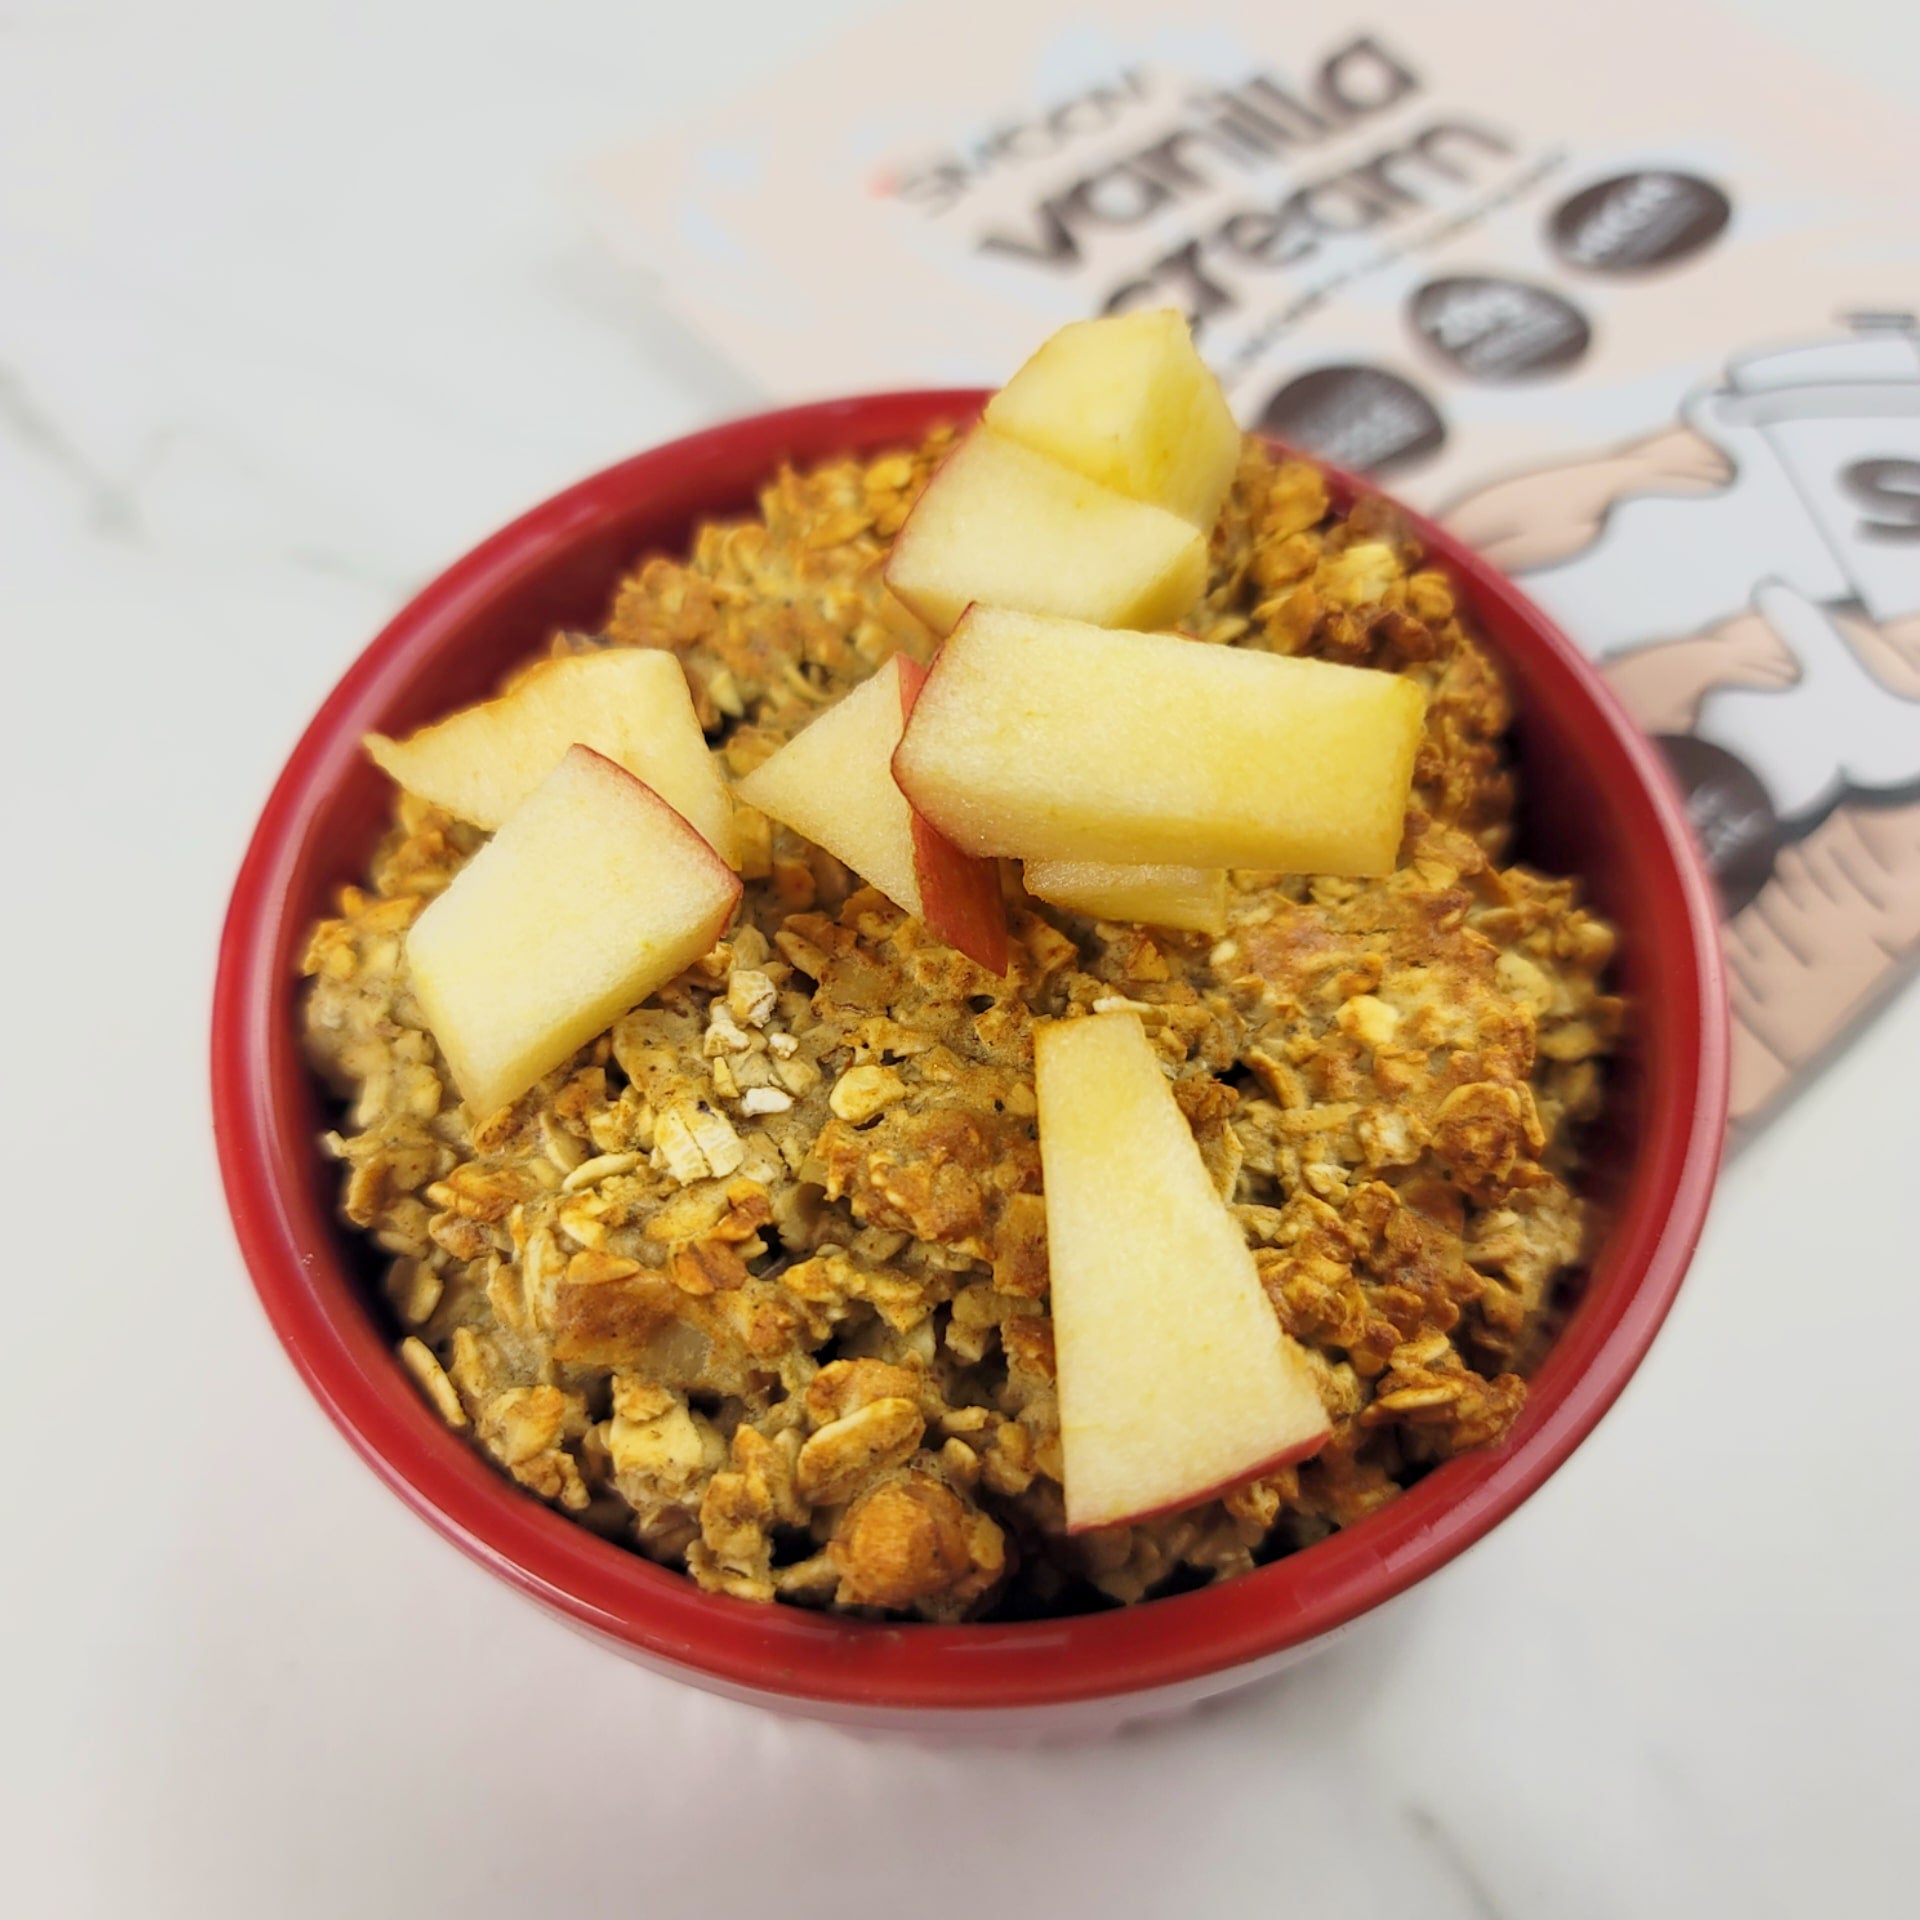 A simple, healthy, high protein breakfast recipe for your fall mornings. Apple Pie Baked Oats using our all-in-one blends and a handful of wholesome ingredients.